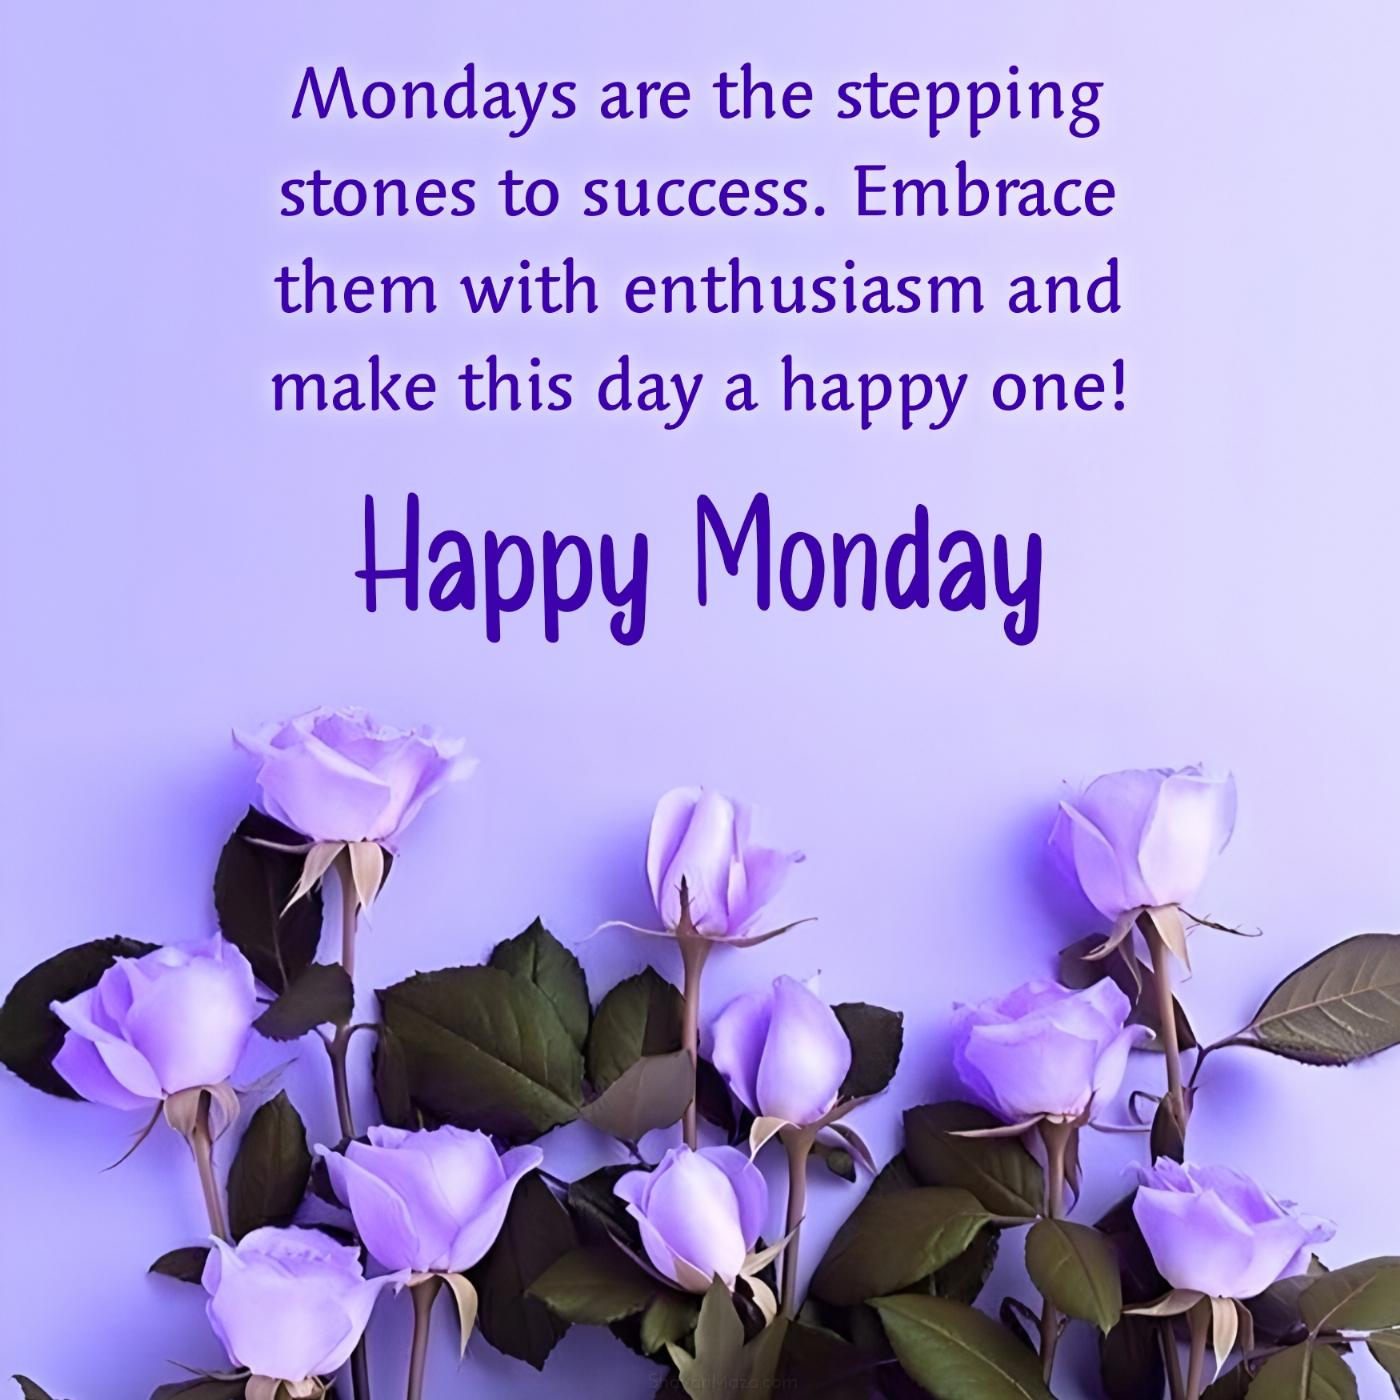 Mondays are the stepping stones to success